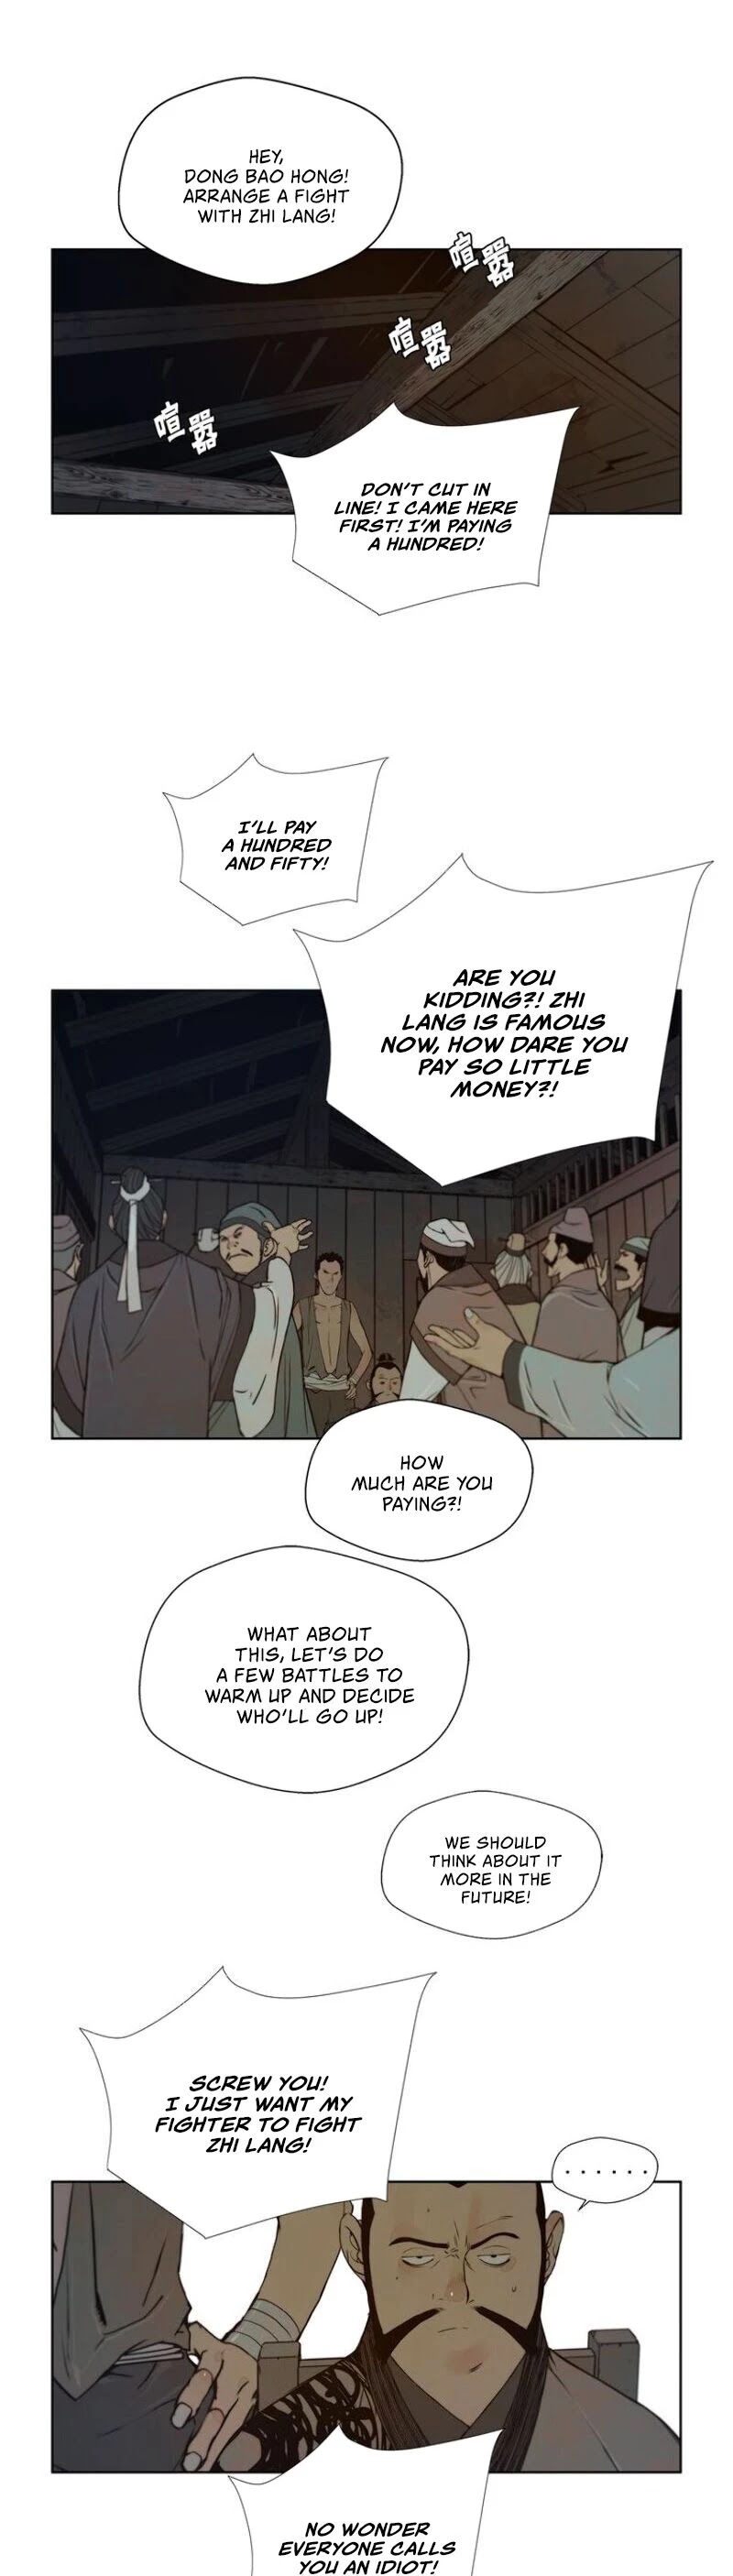 The Sword Of Glory - Page 2